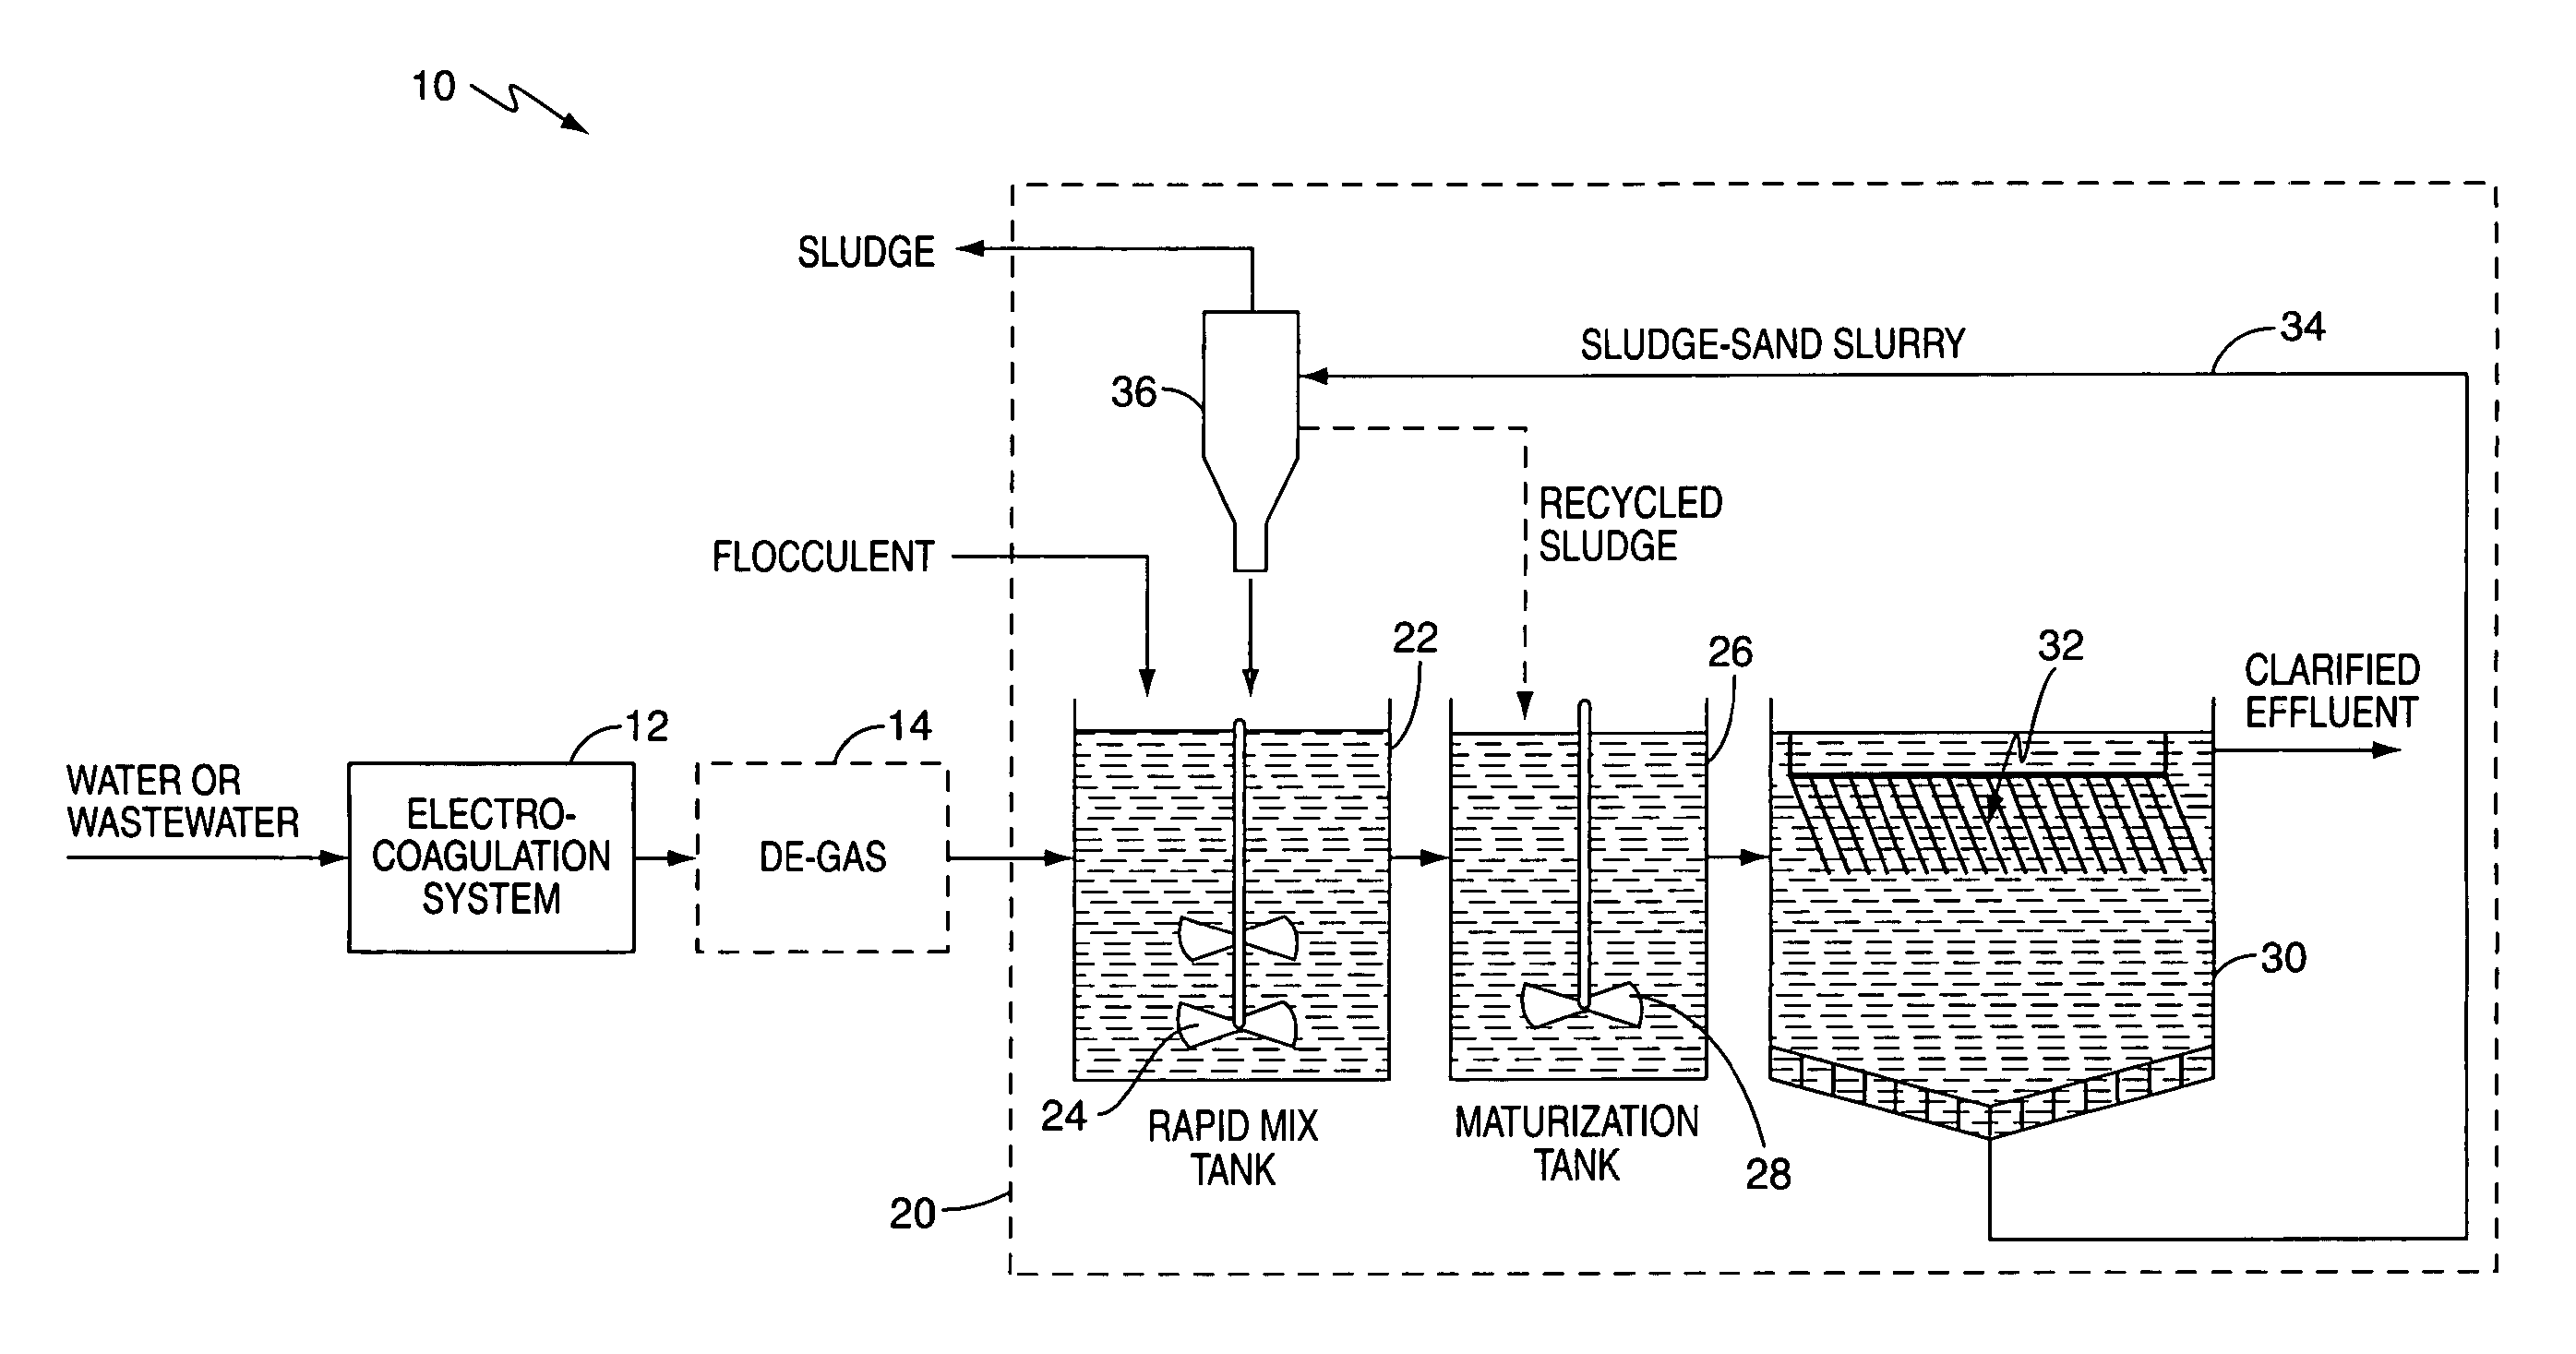 Ballasted flocculation process and system incorporating an electro-coagulation reactor for treating water or wastewater